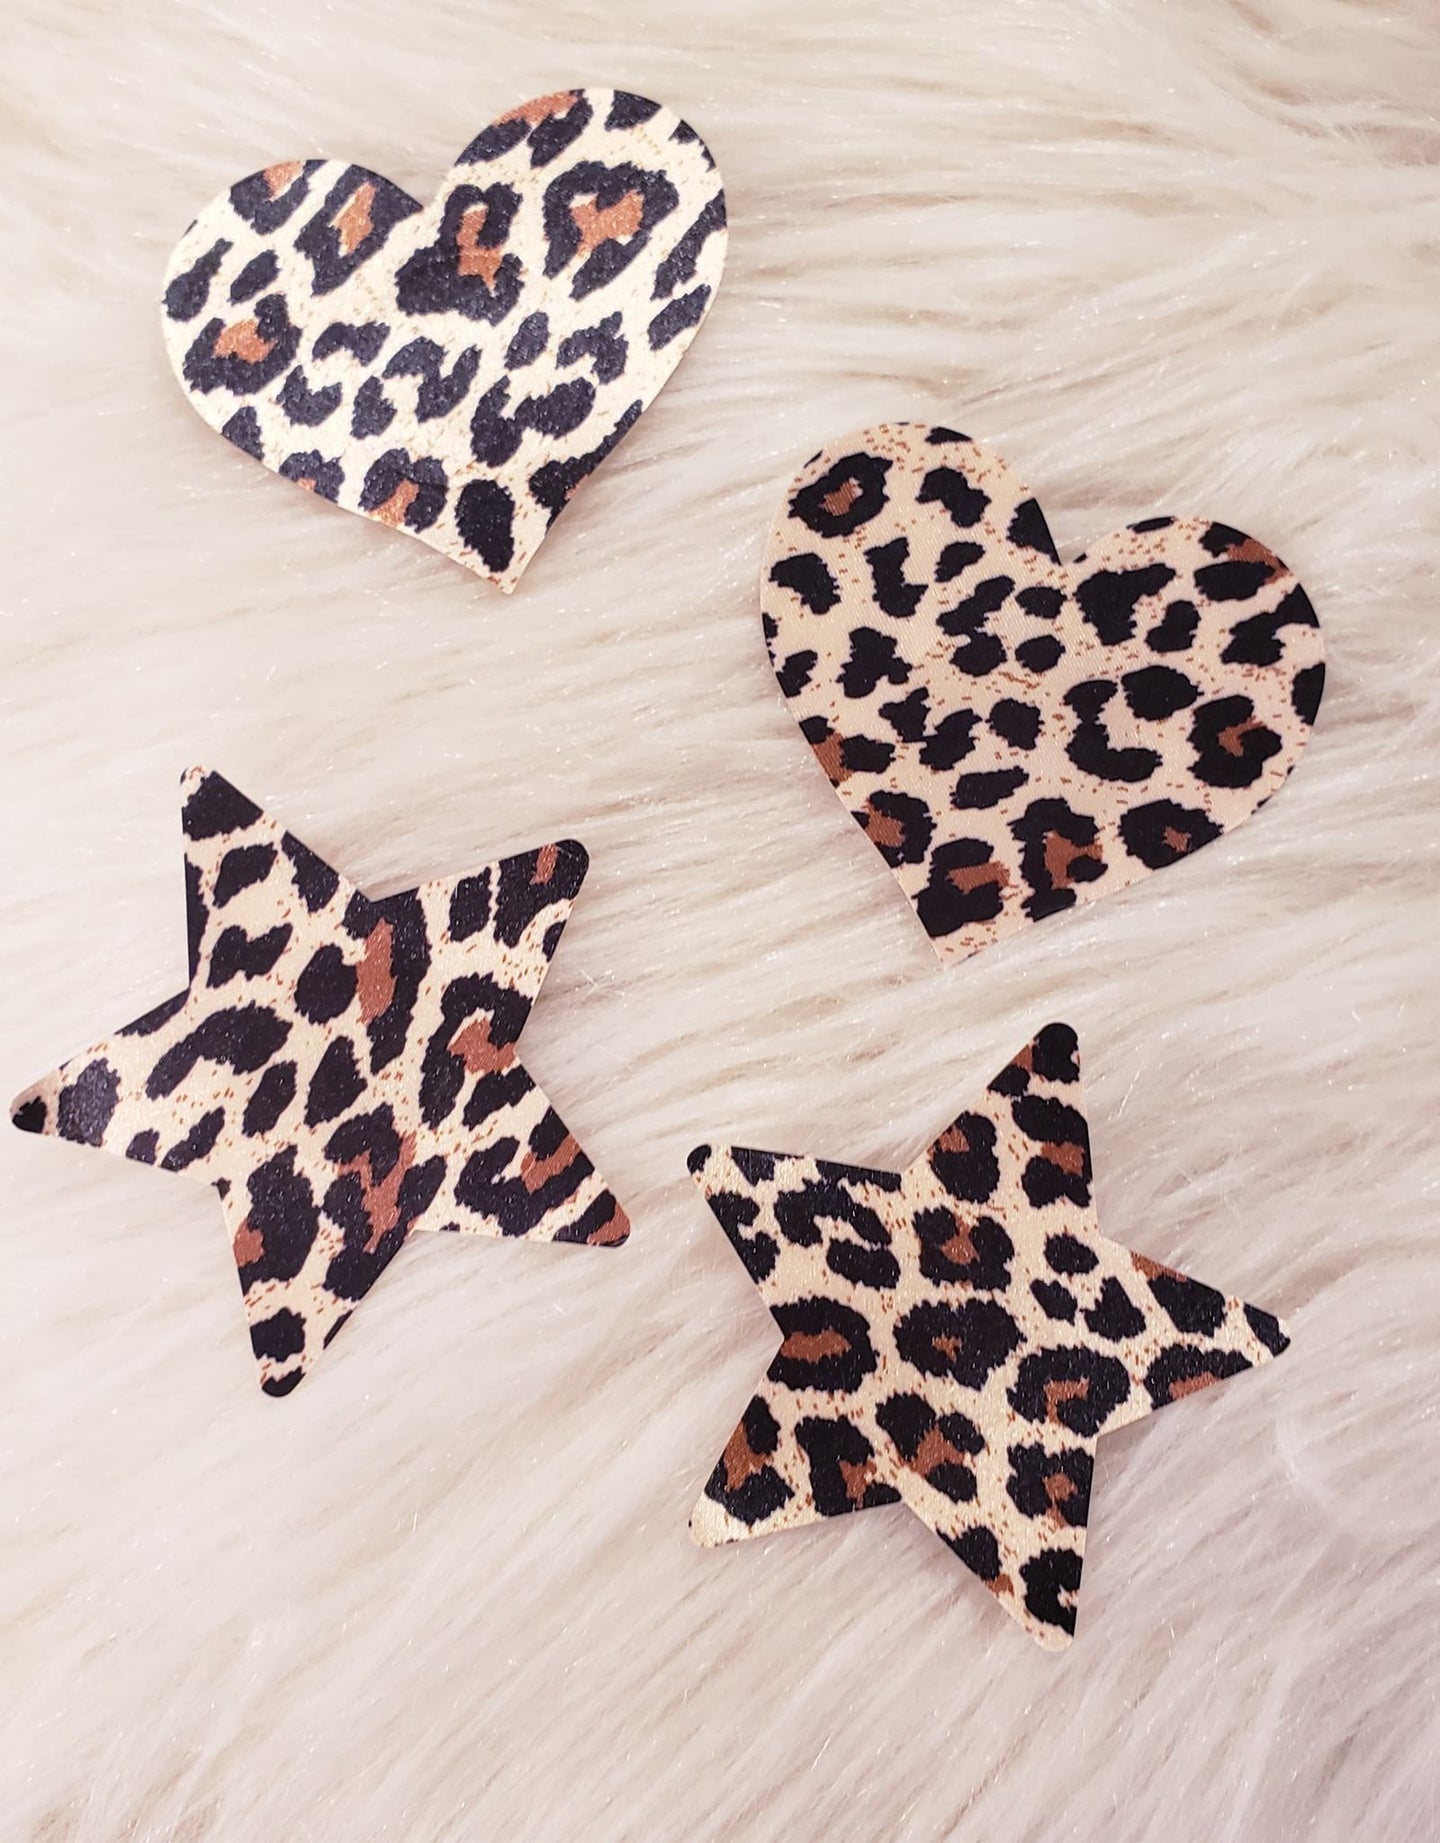 2 Pairs Heart Star Leopard Pasties - Nipple Covers, Stickers, Lifestyle, Rally, Rave, Costume, Lingerie